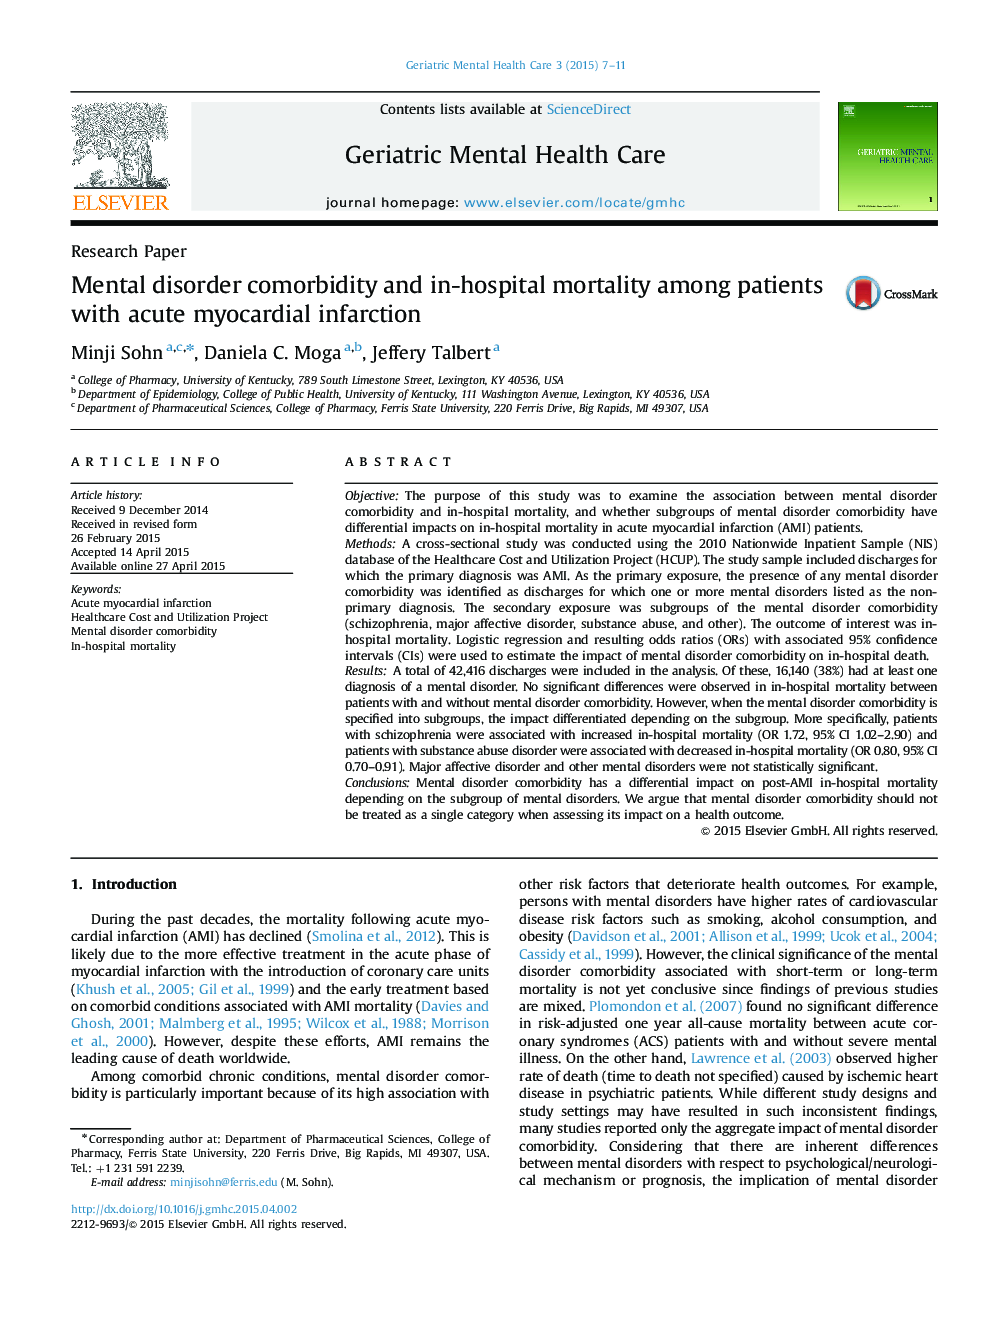 Mental disorder comorbidity and in-hospital mortality among patients with acute myocardial infarction